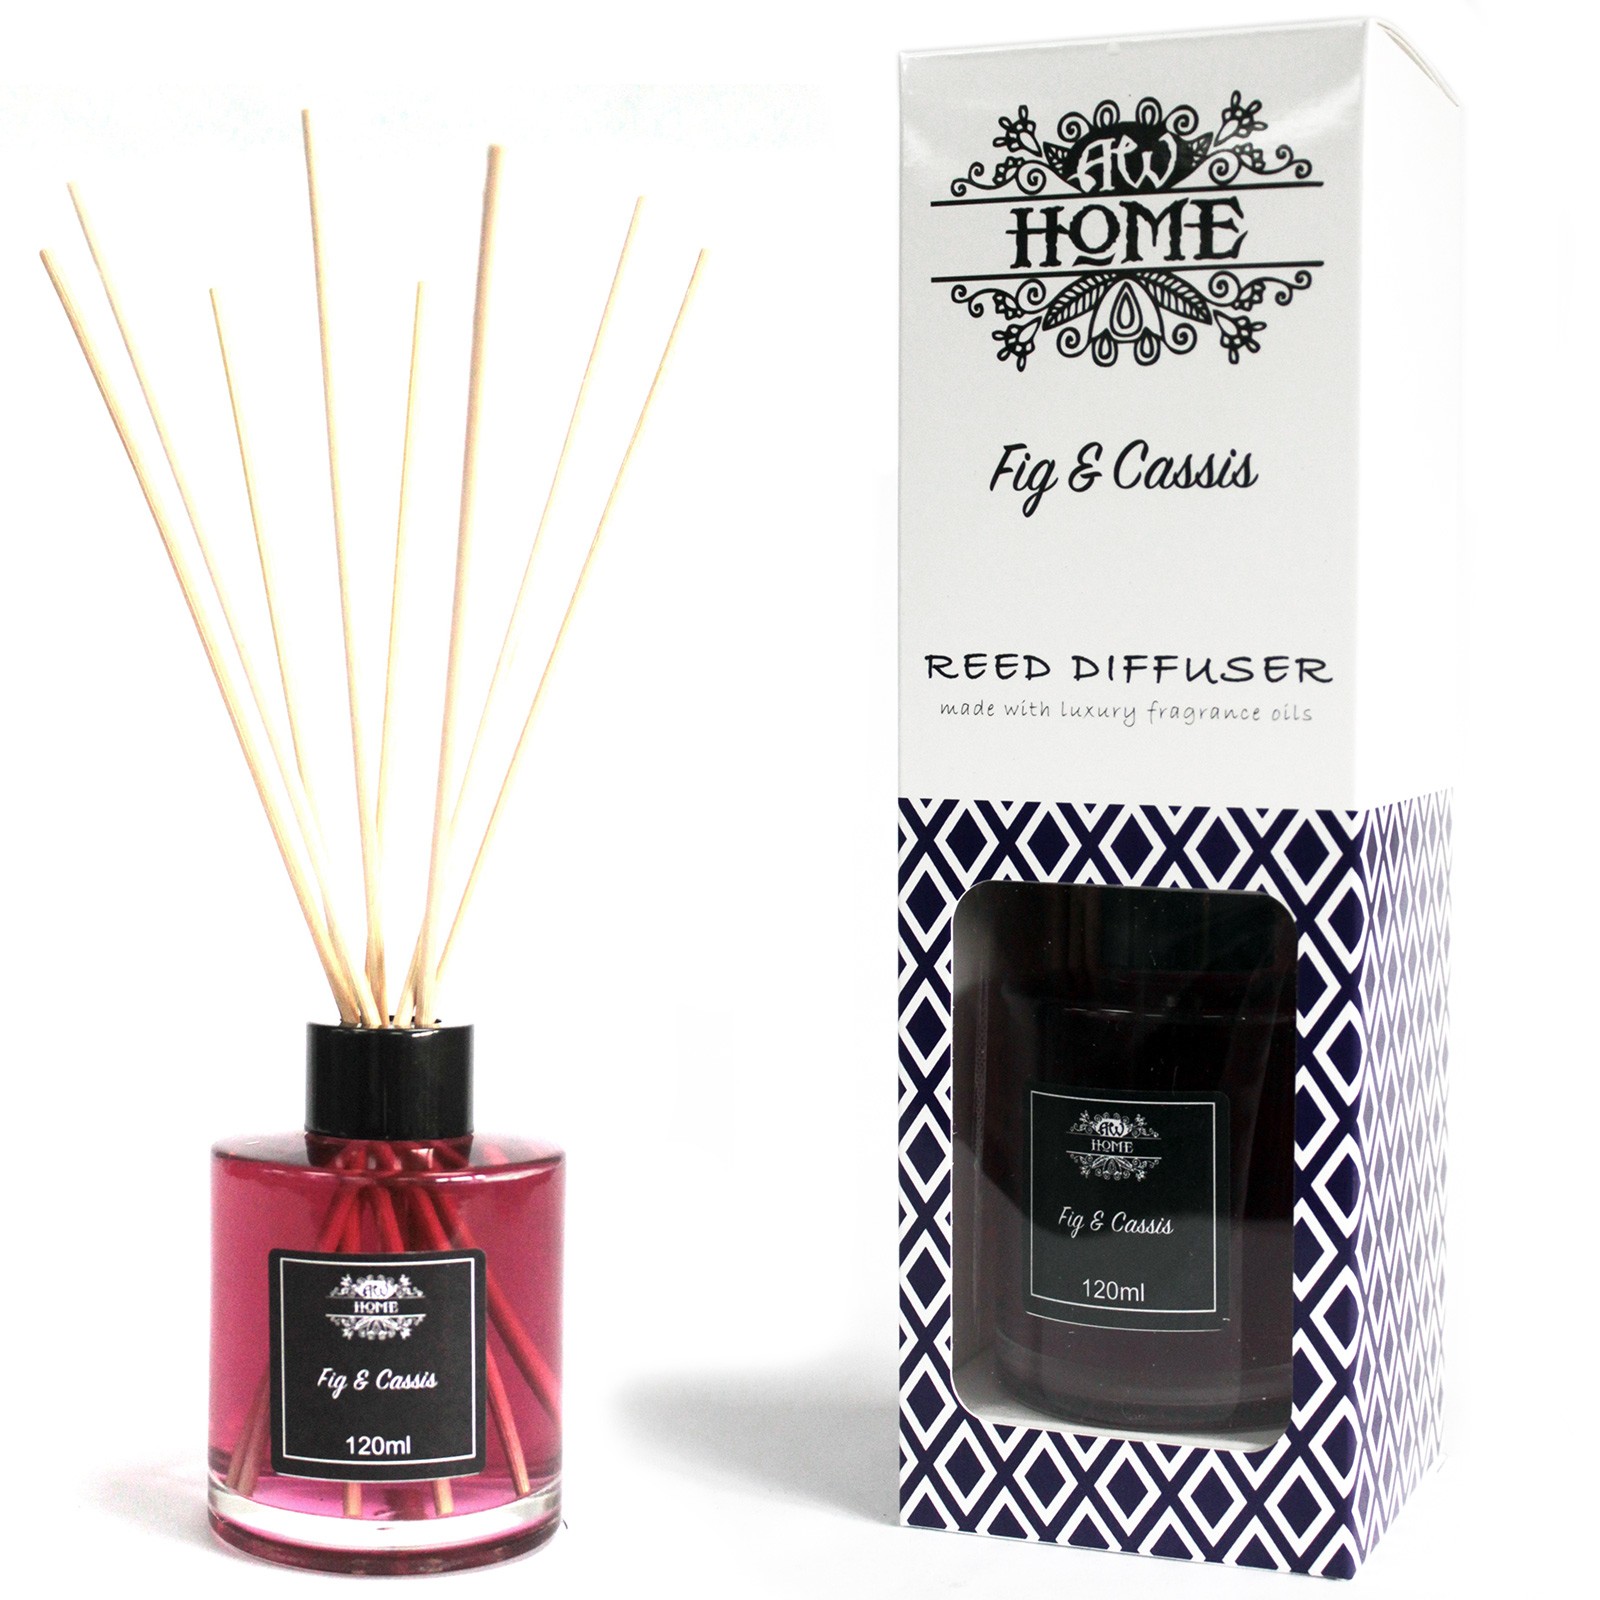 Fig & Cassis - 120ml Reed Diffuser